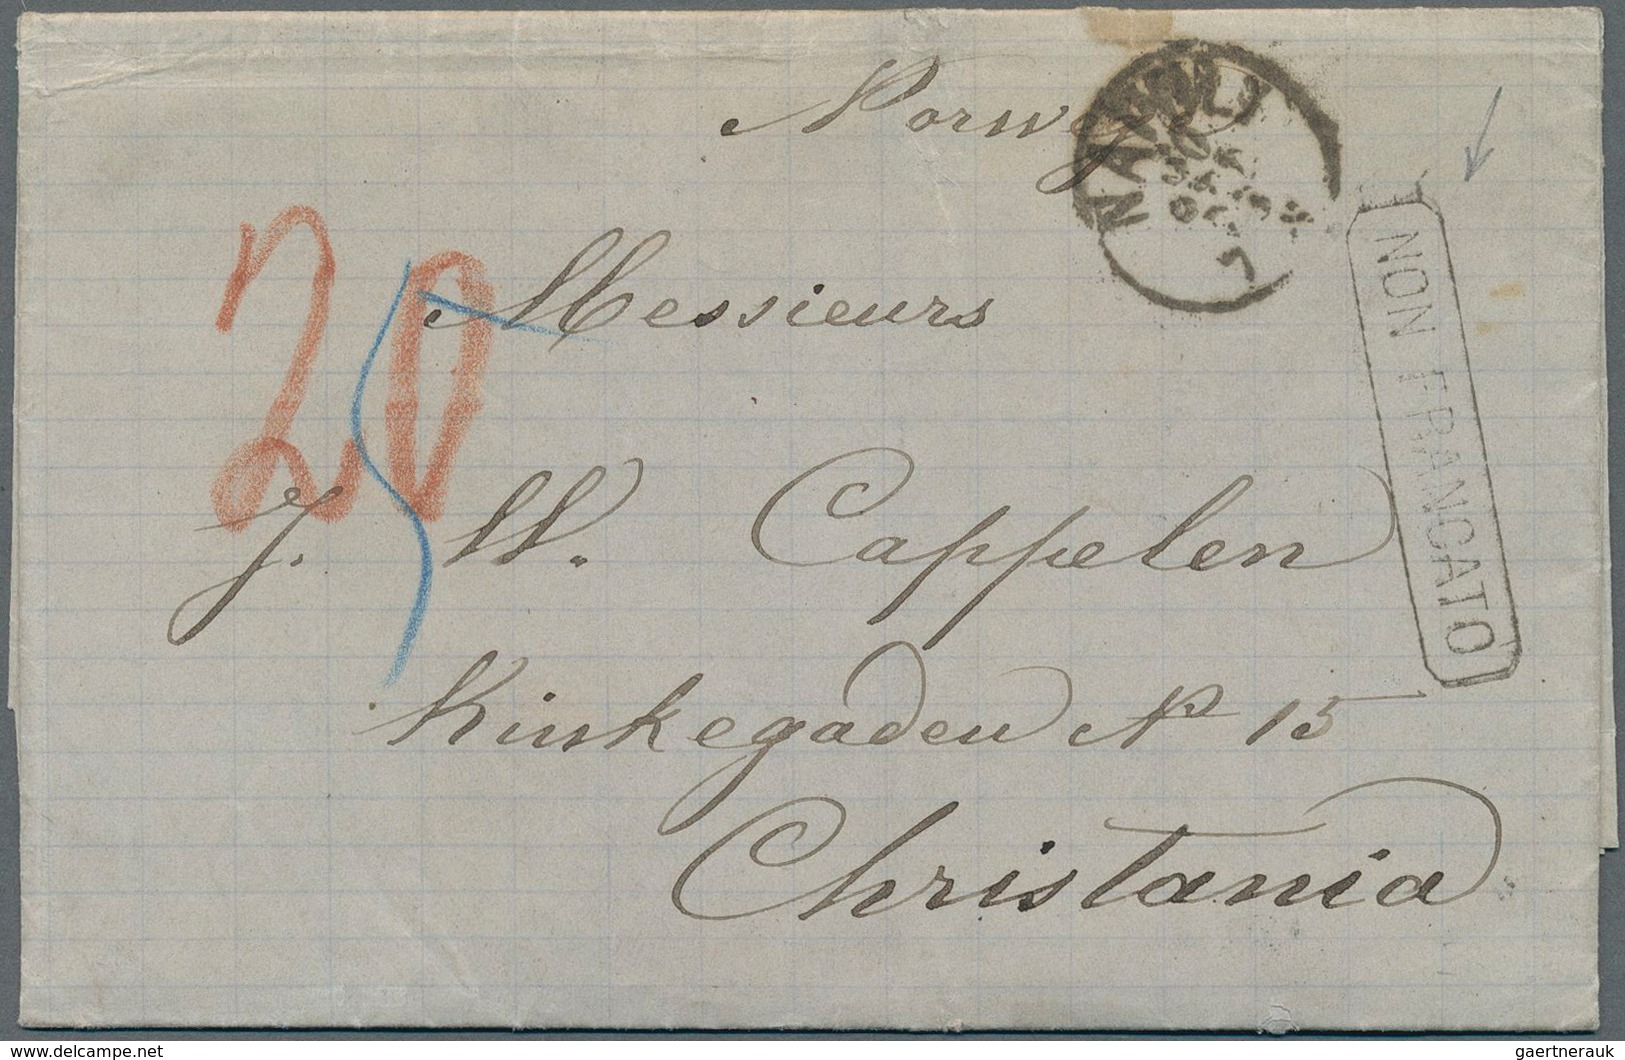 Italien: 1873, "NON FRANCATO" Boxed And Cds "NAPOLI 30 OTT 73" On Stampless Entire-envelope With M/s - Mint/hinged